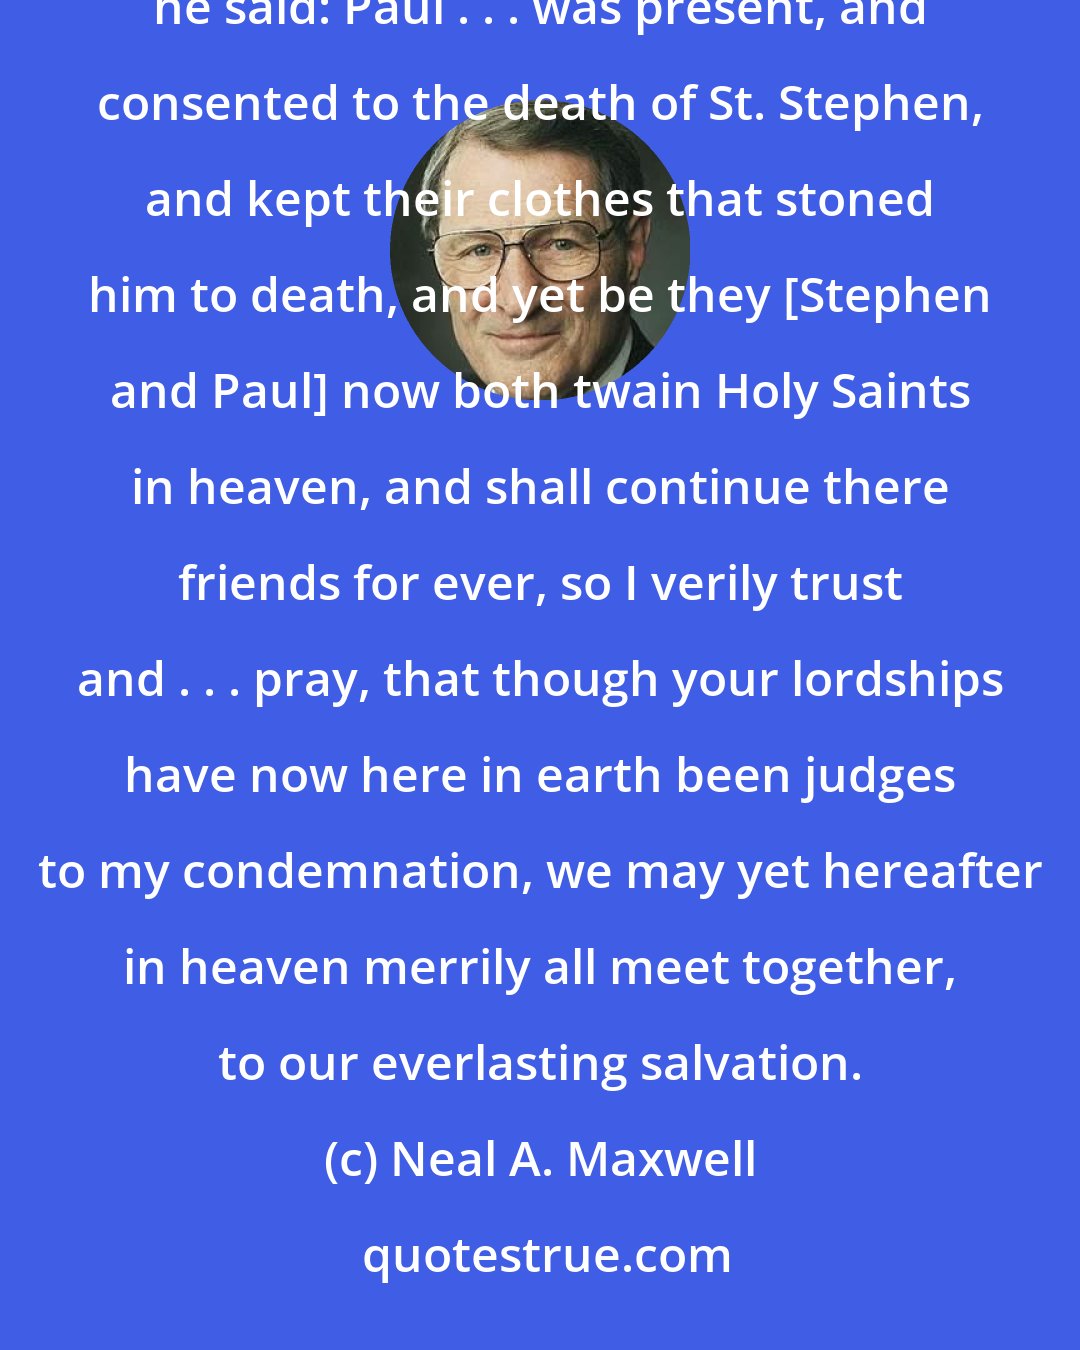 Neal A. Maxwell: Sir Thomas More was a victim of injustice and irony. Generously and meekly, just as he was about to be martyred, he said: Paul . . . was present, and consented to the death of St. Stephen, and kept their clothes that stoned him to death, and yet be they [Stephen and Paul] now both twain Holy Saints in heaven, and shall continue there friends for ever, so I verily trust and . . . pray, that though your lordships have now here in earth been judges to my condemnation, we may yet hereafter in heaven merrily all meet together, to our everlasting salvation.